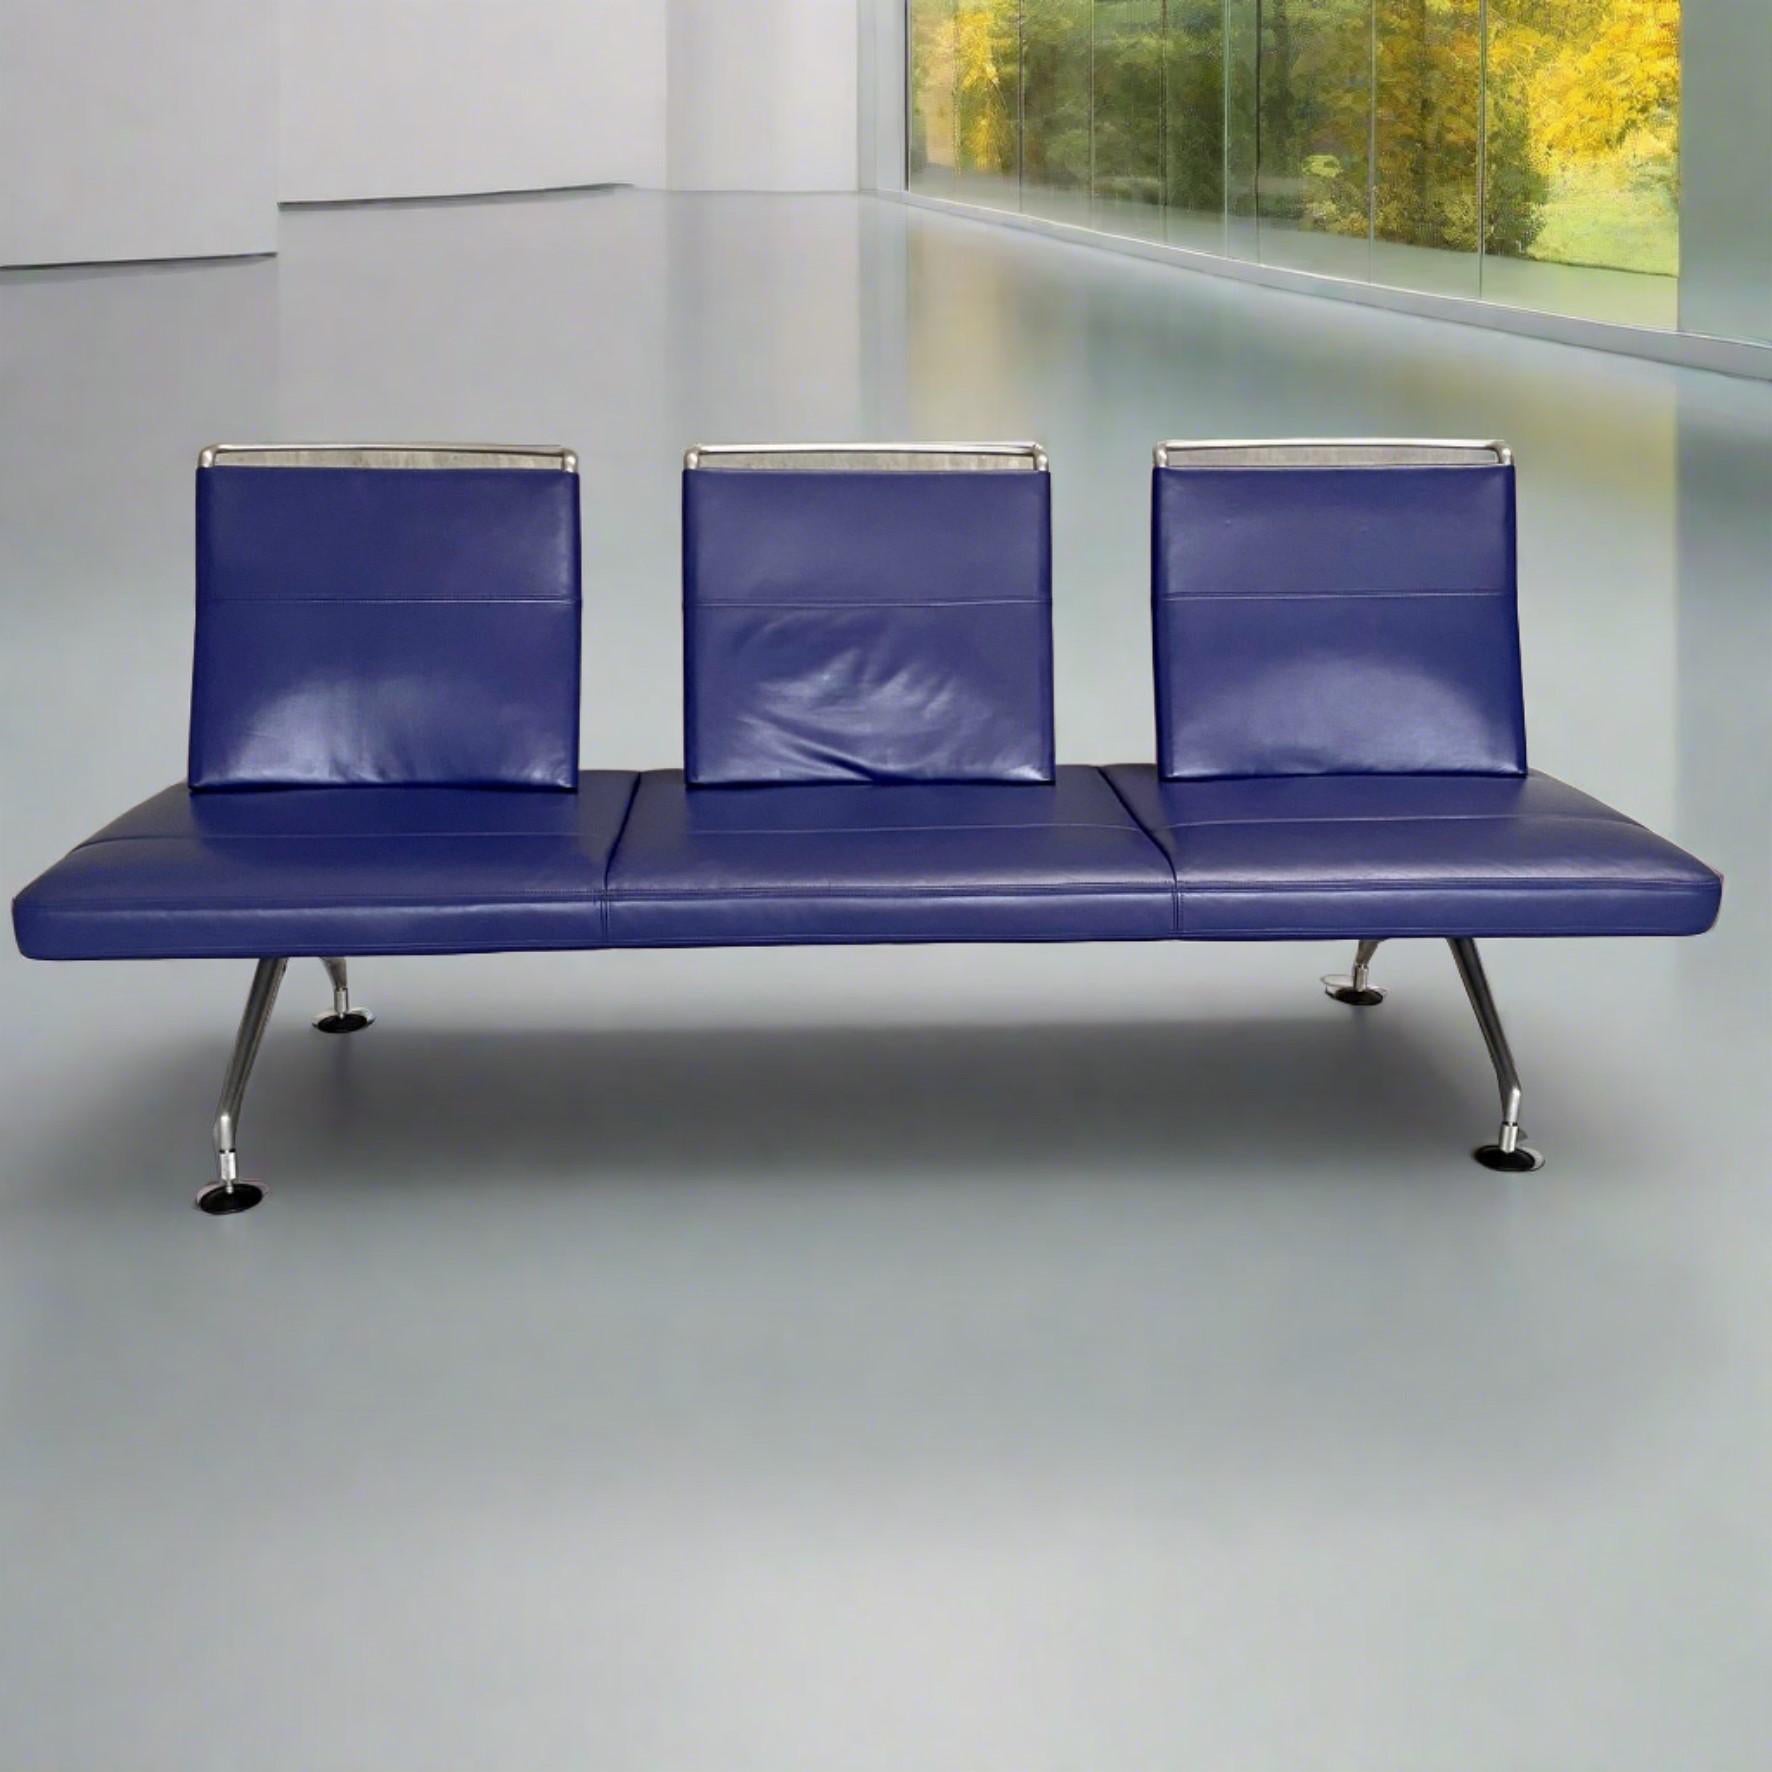 This clever and high-quality Postmodern sofa by Milan-based Antonio Citterio for Vitra designed in 1990, ‘Area’ is a hybrid of daybed and sofa.

And with the seat backs movable to different angles, it is great for a creative office or design